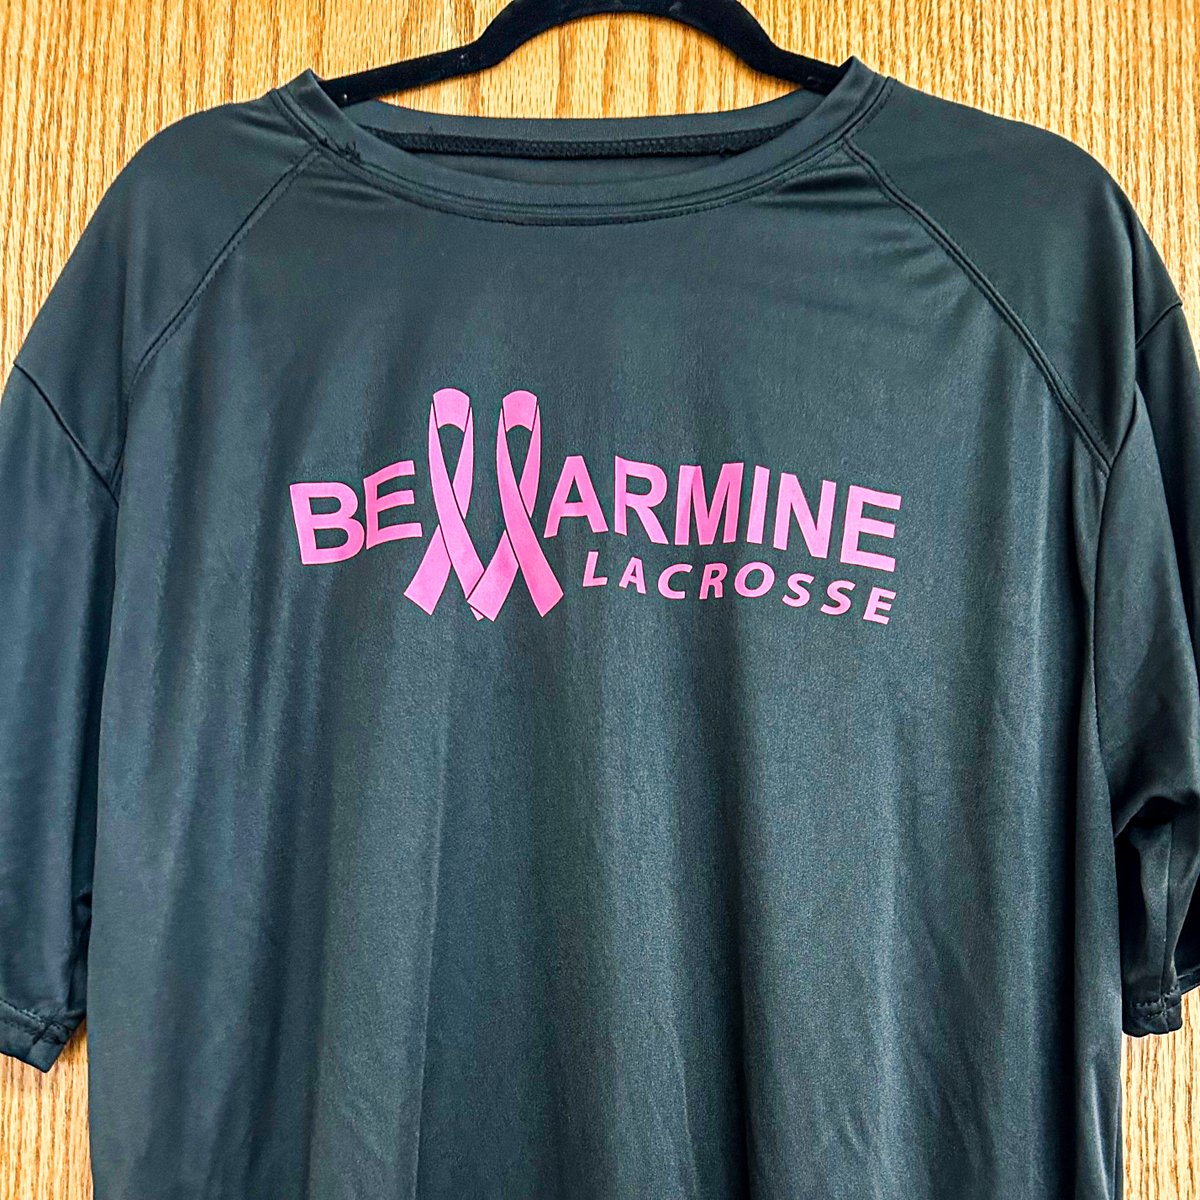 The Knights invite you to help us support the National Breast Cancer Foundation by purchasing a special edition Bellarmine Lacrosse T-shirt at this Saturday's game against Cleveland State. All proceeds go directly to the NBCF to assist women battling the disease. 🩷